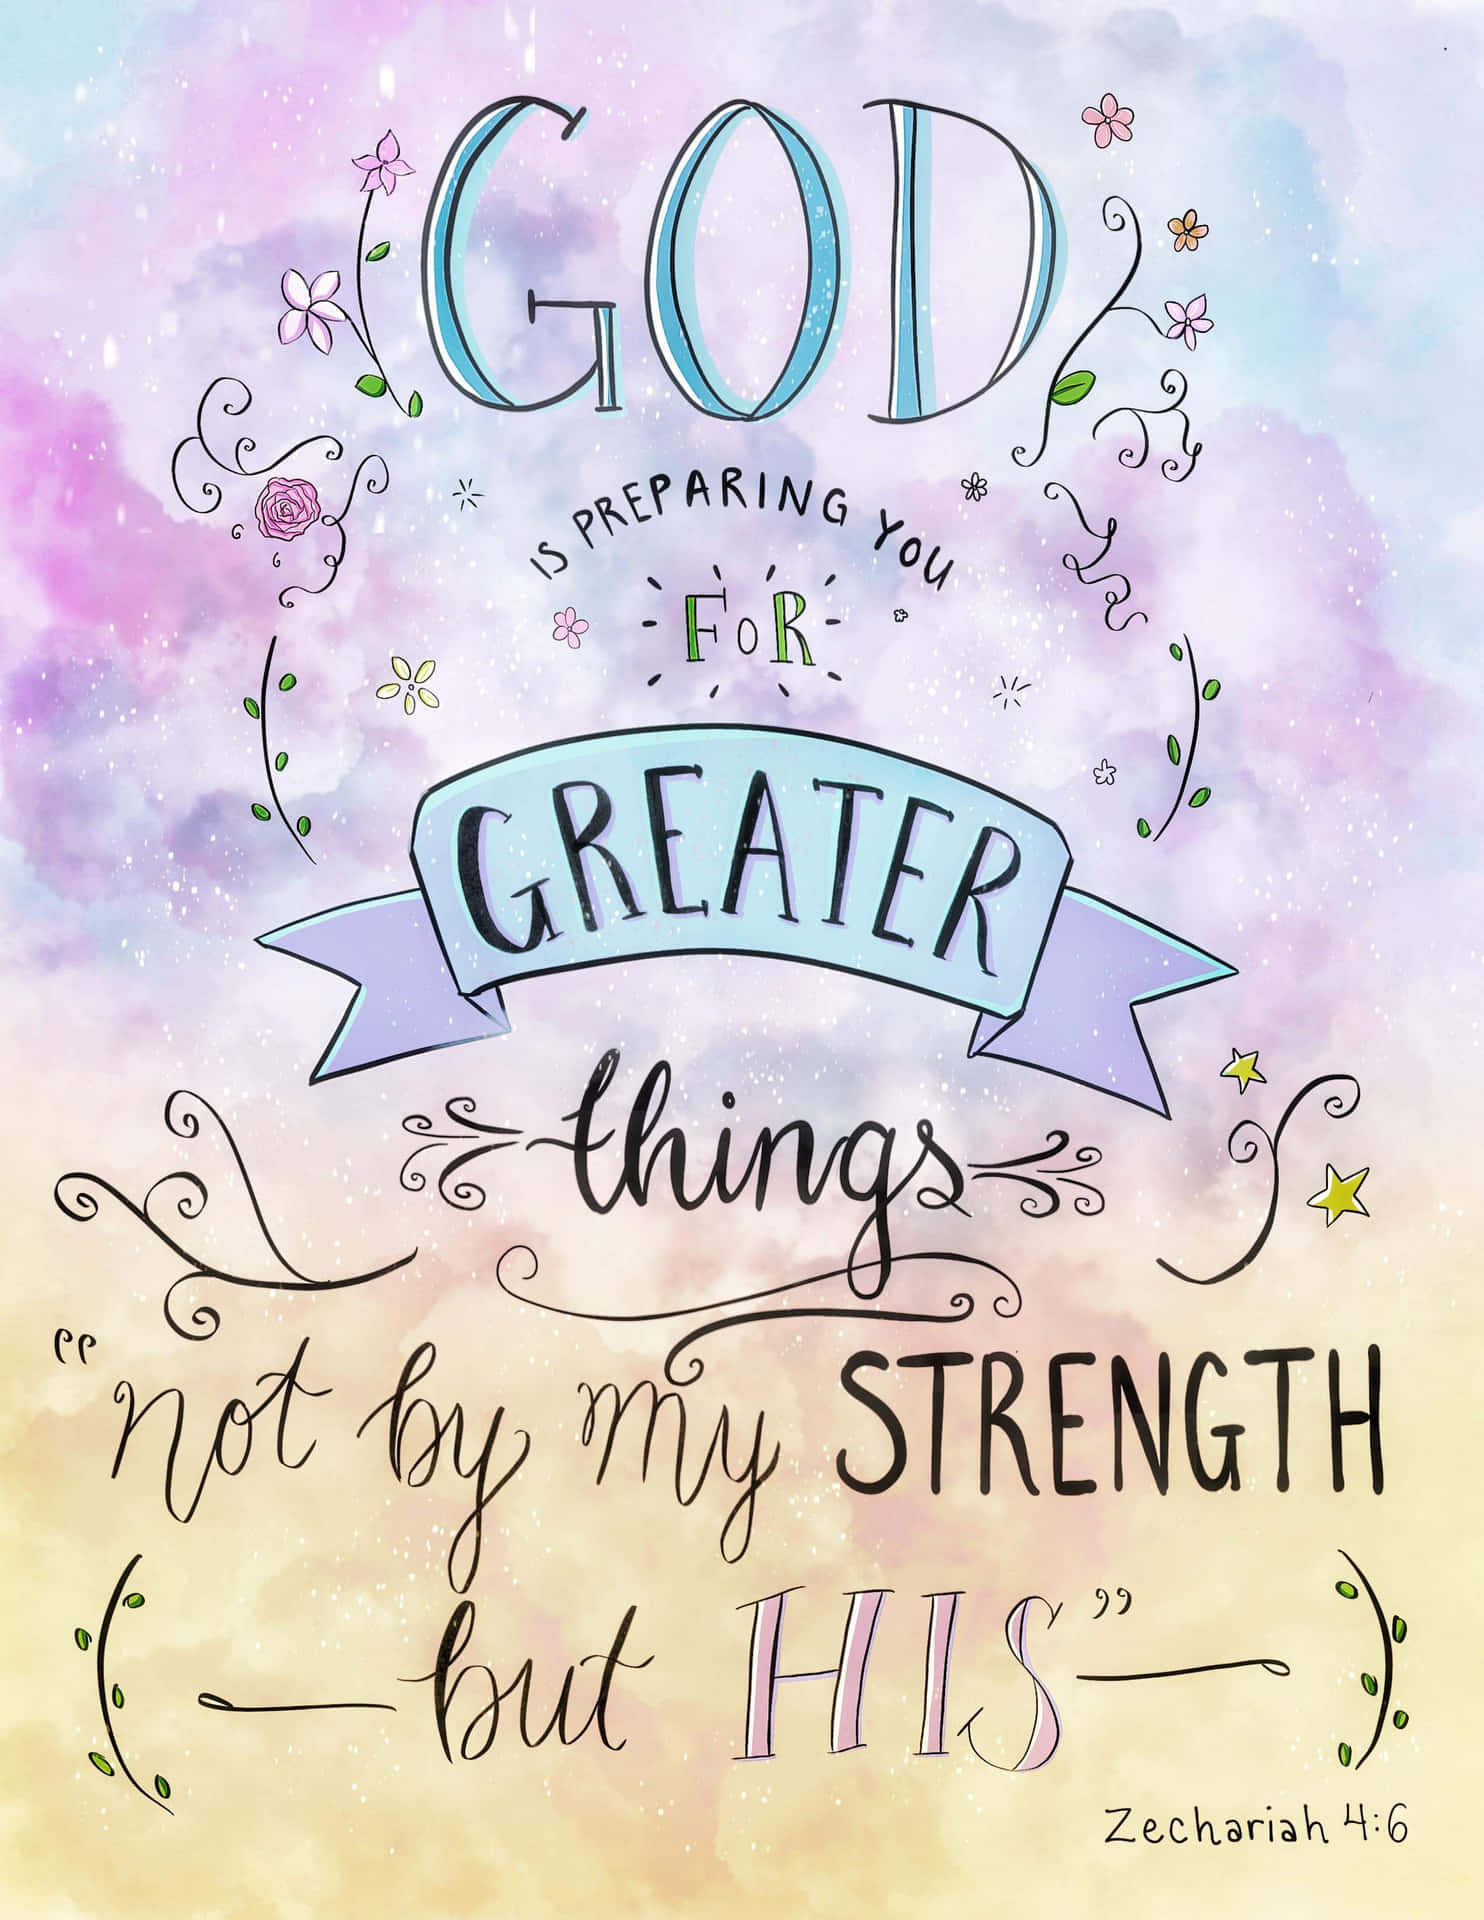 God Is Preparing You For Greater Things Strength Not By My Strength But His